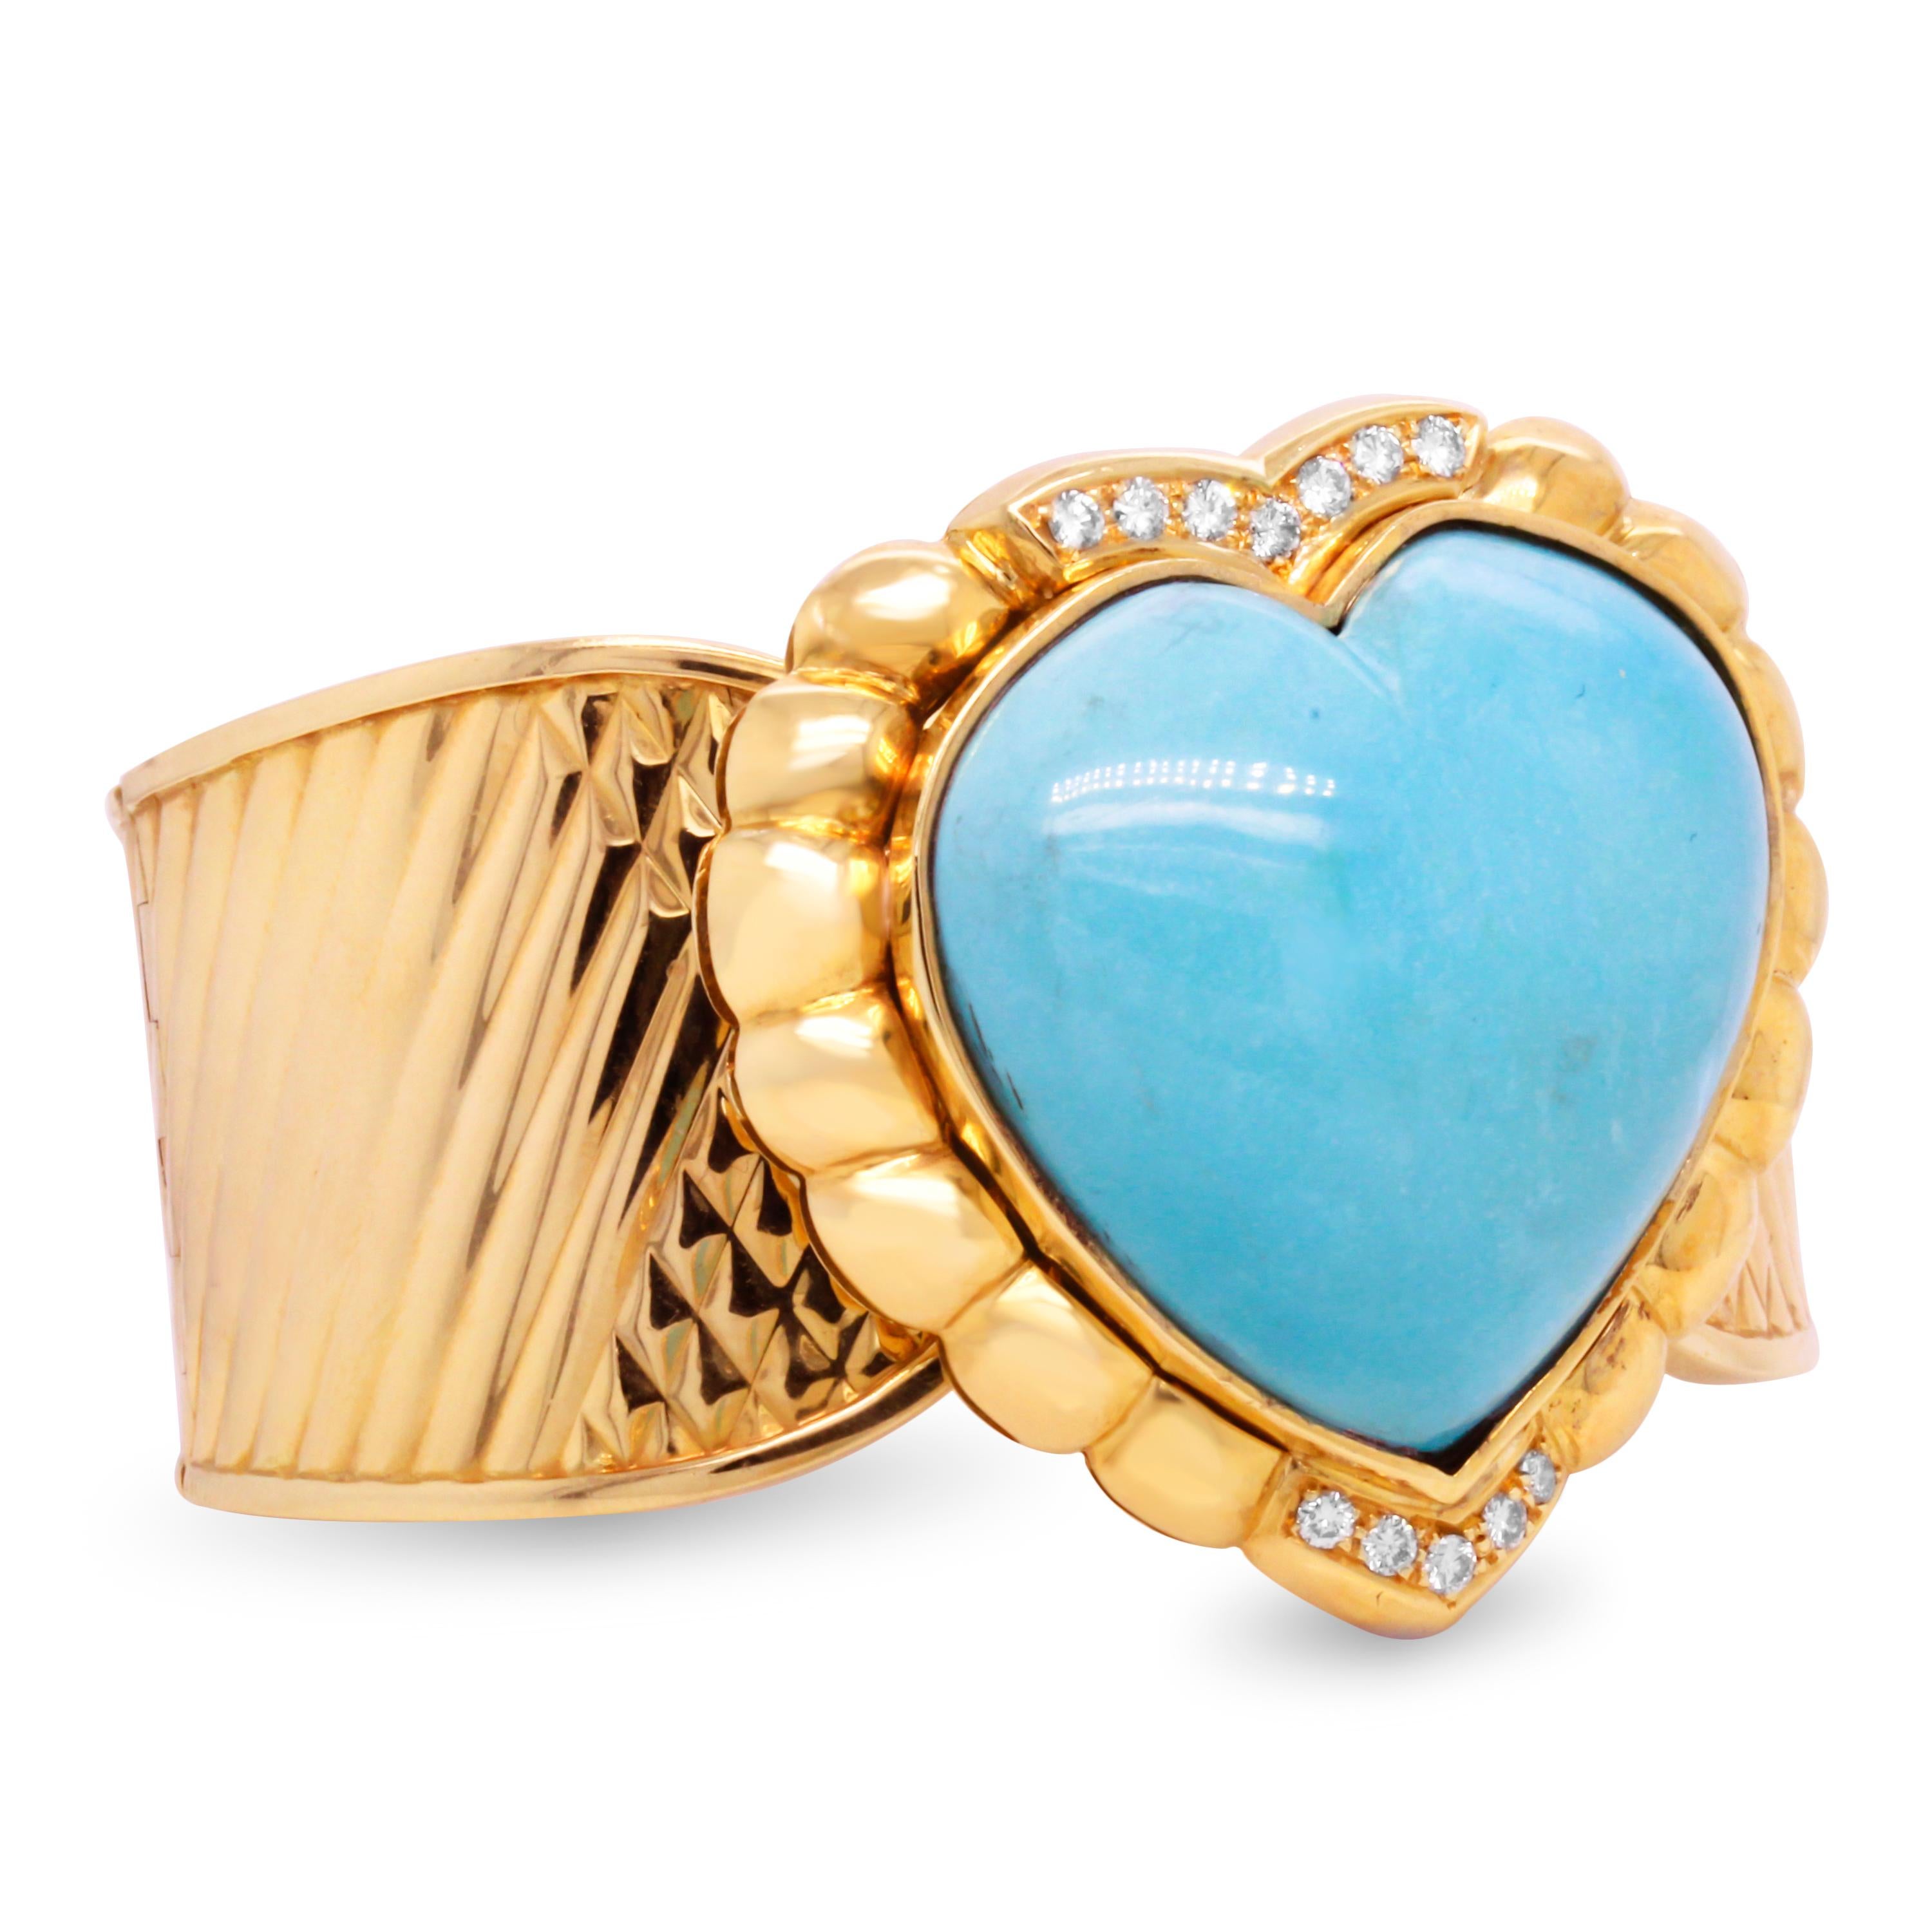 Heart Shape Persian Turquoise 18K Yellow Gold and Diamond Large Cuff Bracelet

This one-of-a-kind cuff features a special-cut, heart shape, Persian Turquoise center with diamonds on top and underneath.

The cuff bracelet has a waved, unique pattern